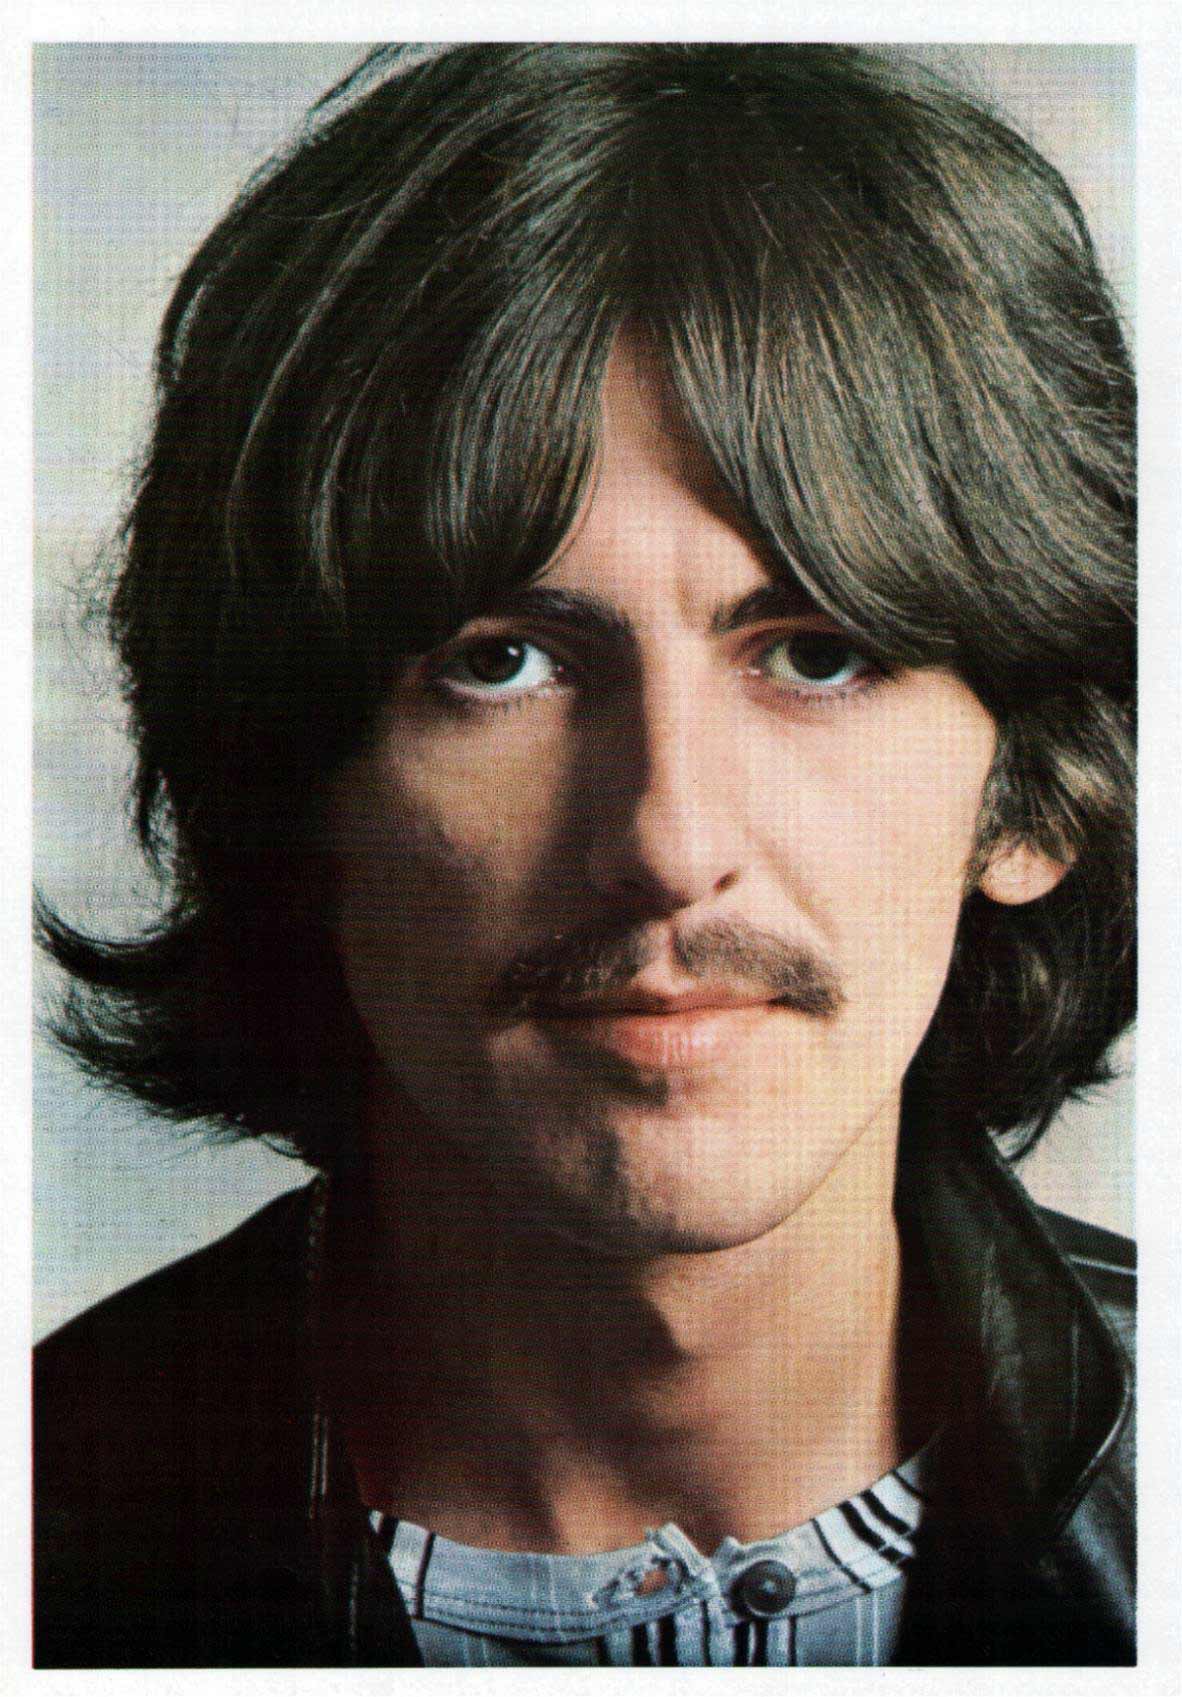 25 Years Ago Today, George Harrison was the Last Beatle to Top the